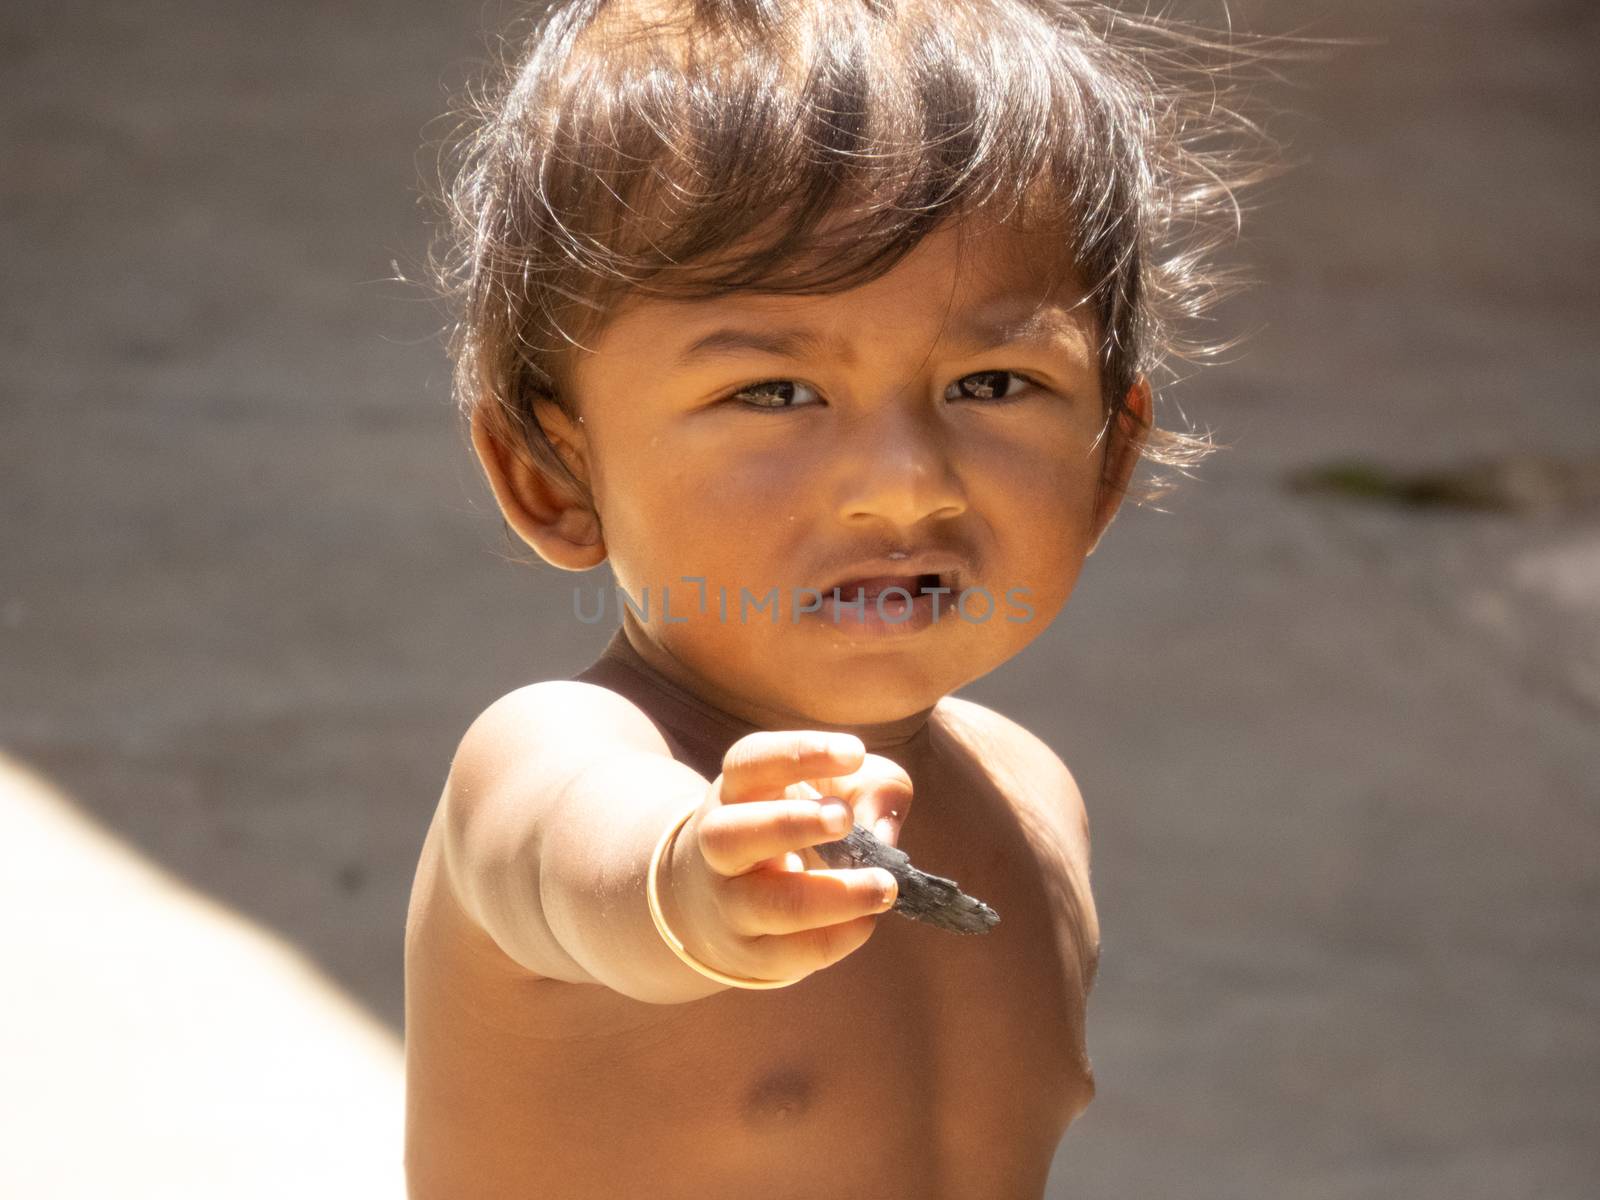 Chennai , India. 20 july 2020. A child showing his hand to the camera